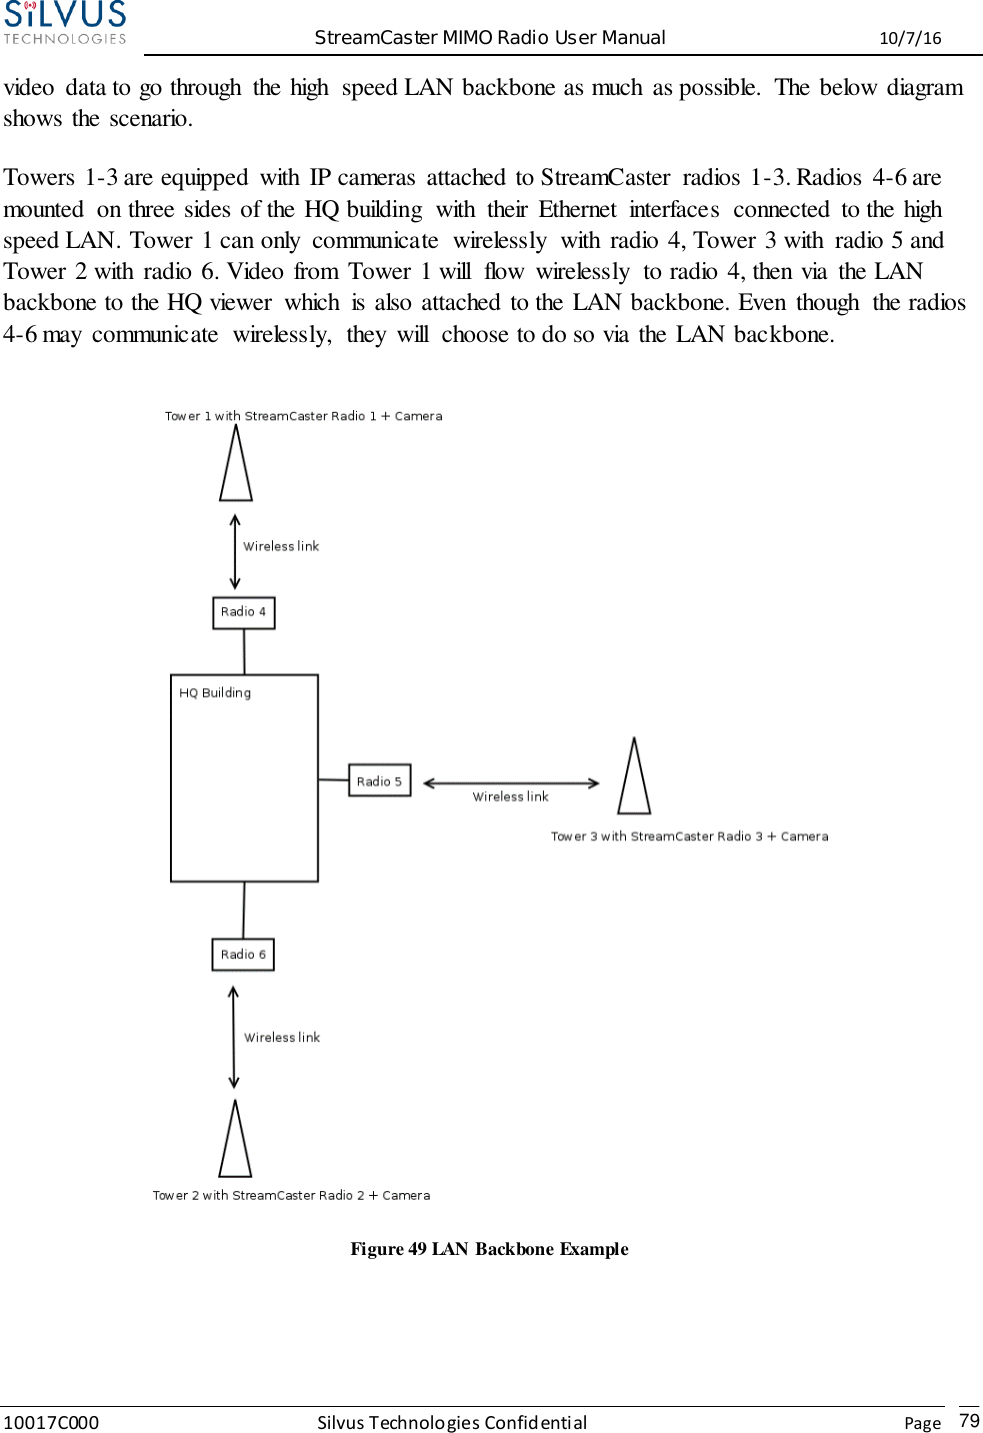  StreamCaster MIMO Radio User Manual  10/7/16 10017C000 Silvus Technologies Confidential    Page   79 video  data to go through  the high  speed LAN backbone as much  as possible.  The below diagram shows the scenario. Towers 1-3 are equipped  with  IP cameras  attached to StreamCaster  radios 1-3. Radios  4-6 are mounted  on three sides of the HQ building  with  their  Ethernet  interfaces  connected  to the high speed LAN. Tower 1 can only  communicate  wirelessly  with  radio 4, Tower 3 with  radio 5 and Tower 2 with  radio 6. Video from  Tower 1 will  flow  wirelessly  to radio 4, then via  the LAN backbone to the HQ viewer  which  is also attached to the LAN backbone. Even  though  the radios 4-6 may  communicate  wirelessly,  they  will  choose to do so via the LAN backbone.   Figure 49 LAN Backbone Example  